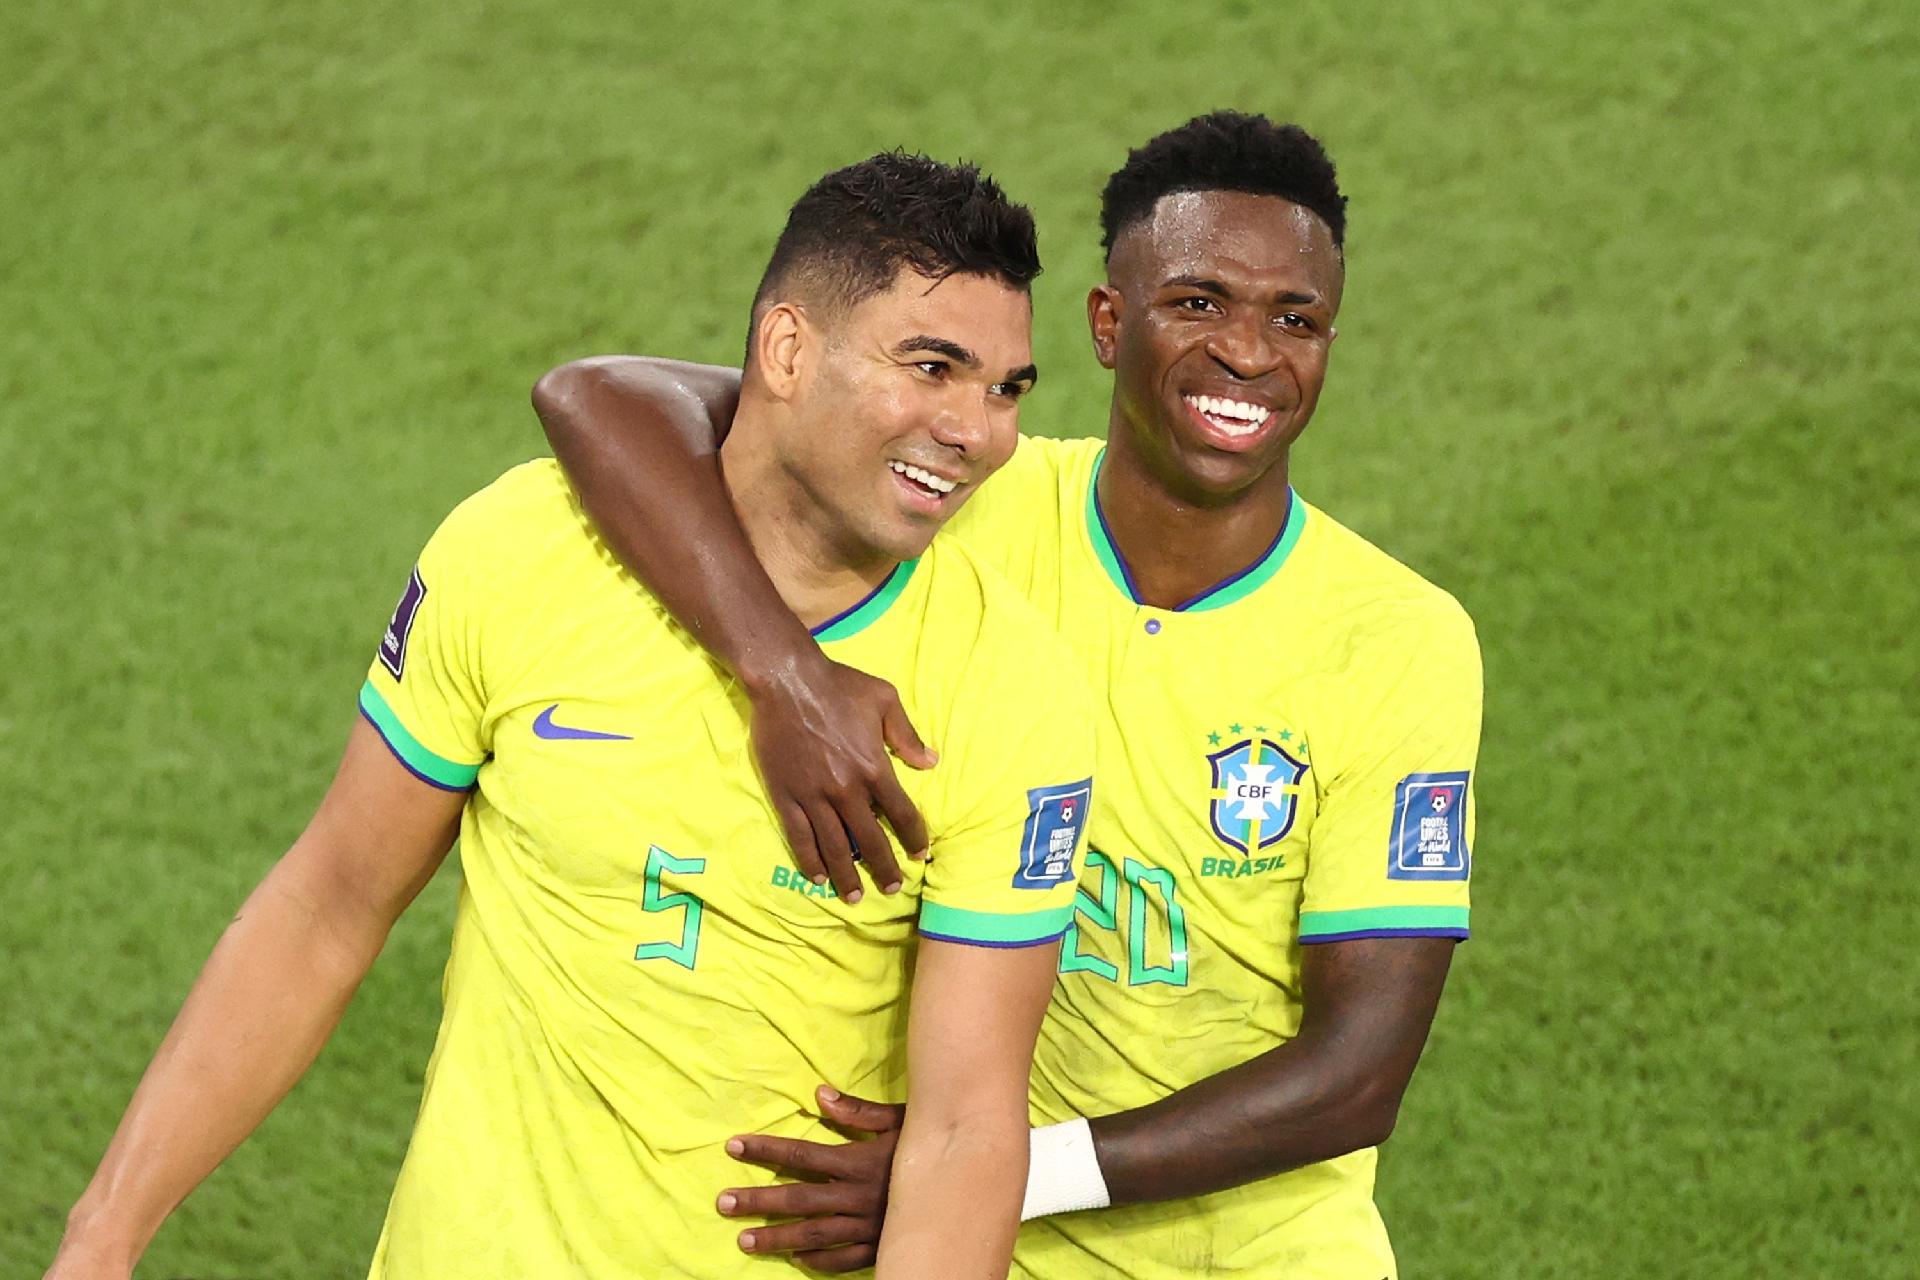 Casemiro and Vinicius Junior celebrate after the midfielder's goal in the match between Brazil and Switzerland for the Qatar World Cup - Robert Cianflone ​​/ Team